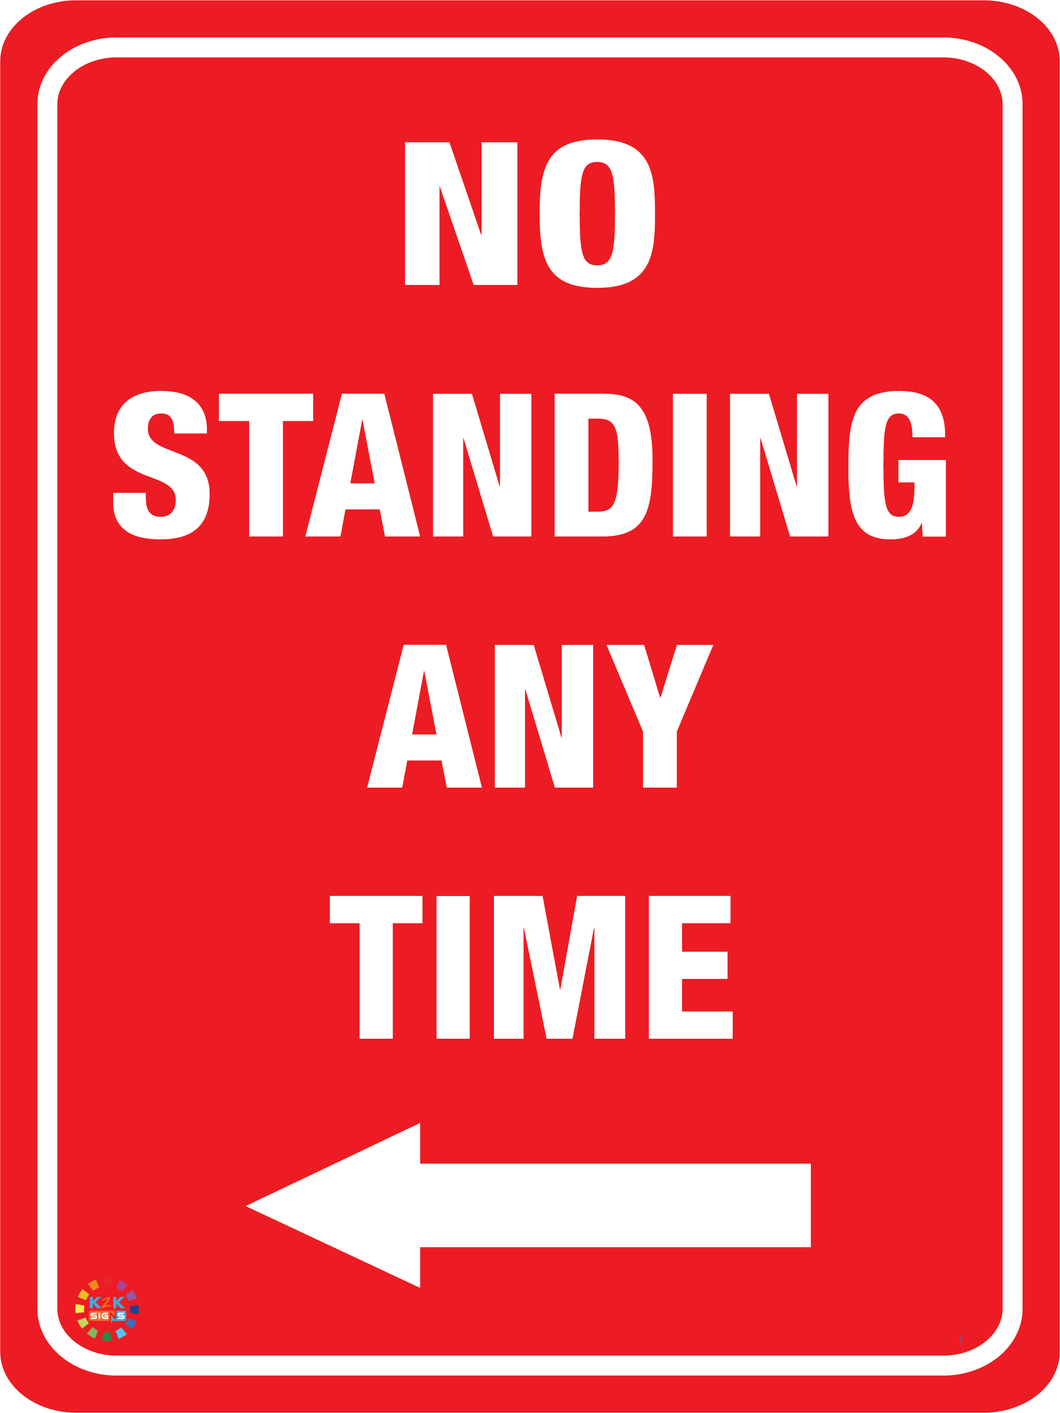 No Standing Any Time (Left Arrow) Sign